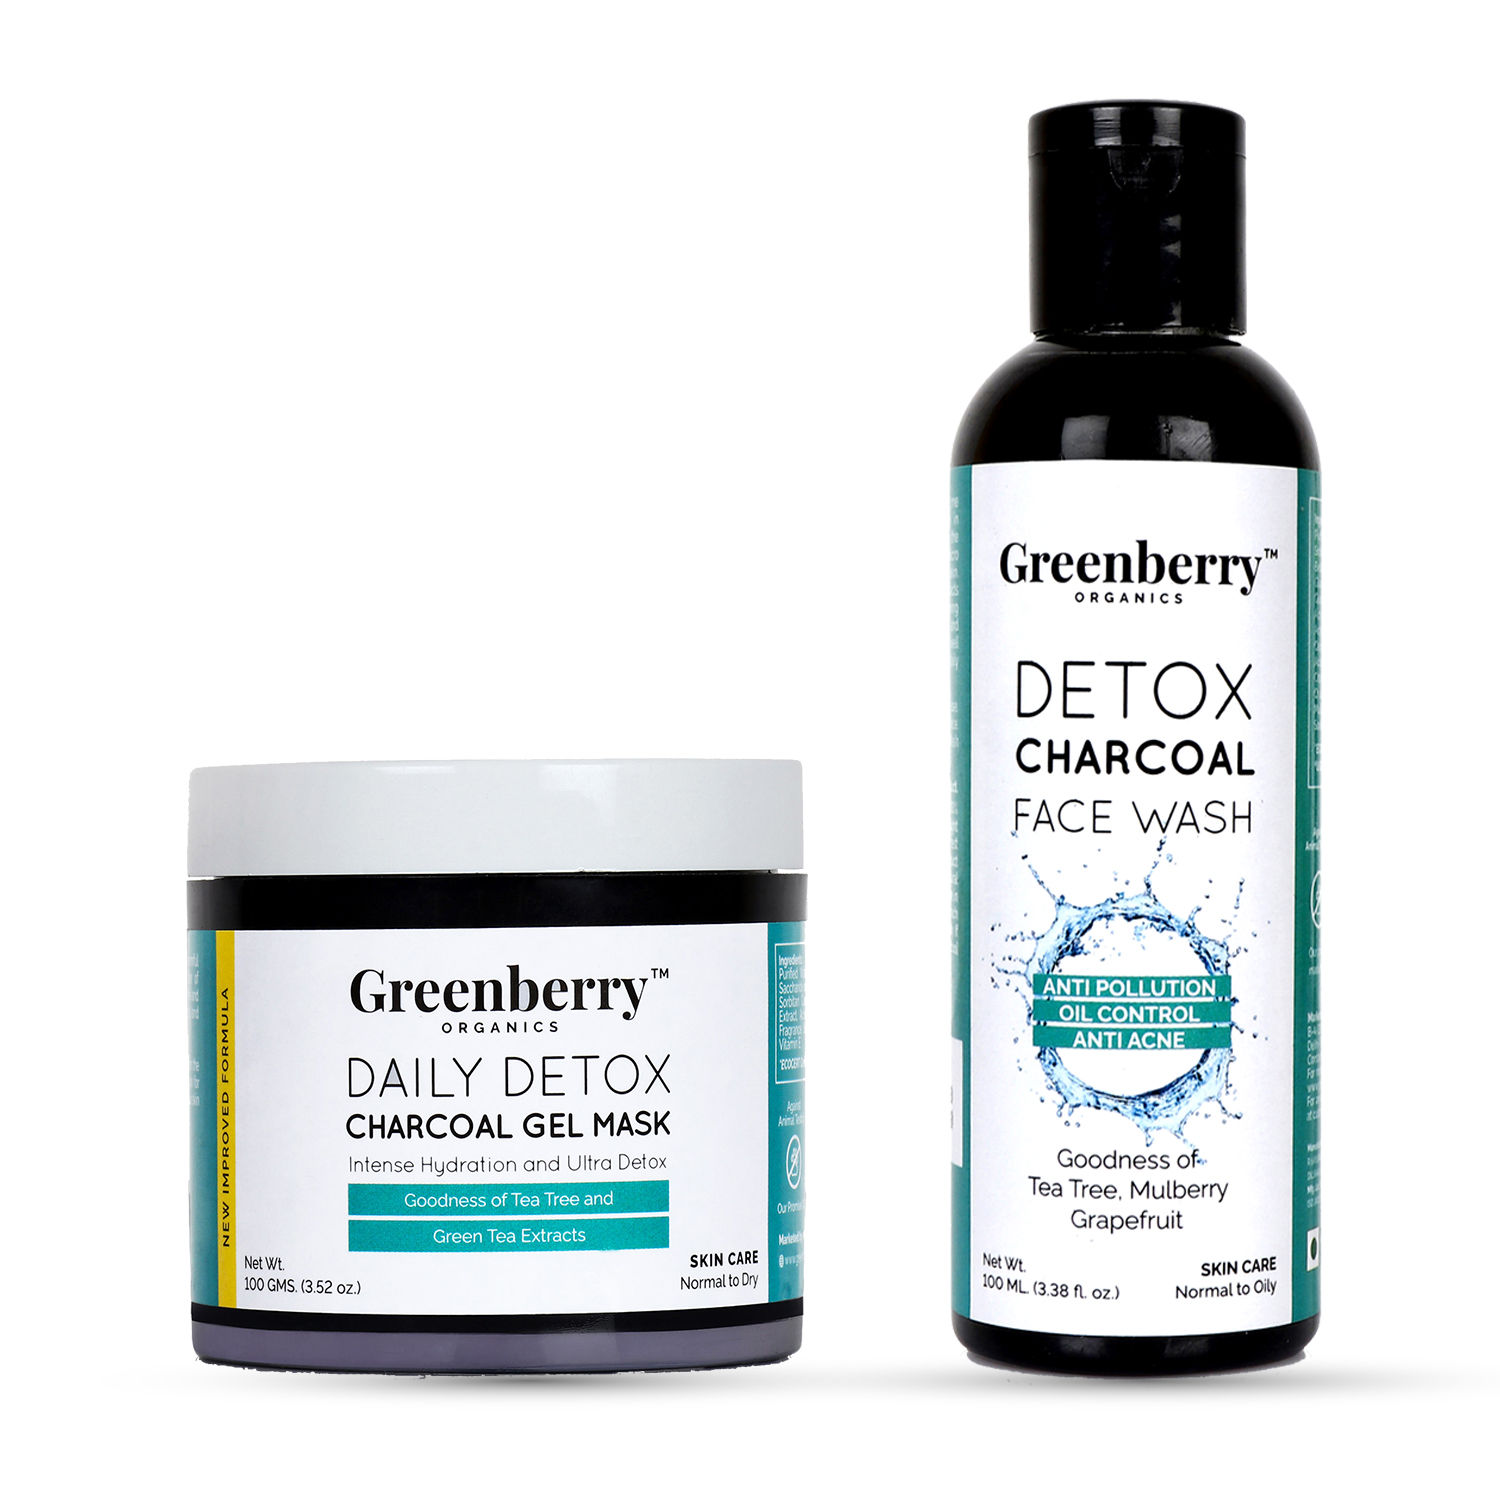 Buy Greenberry Organics Daily Detox Charcoal Gel Mask & Detox Charcoal Face Wash Combo - Purplle